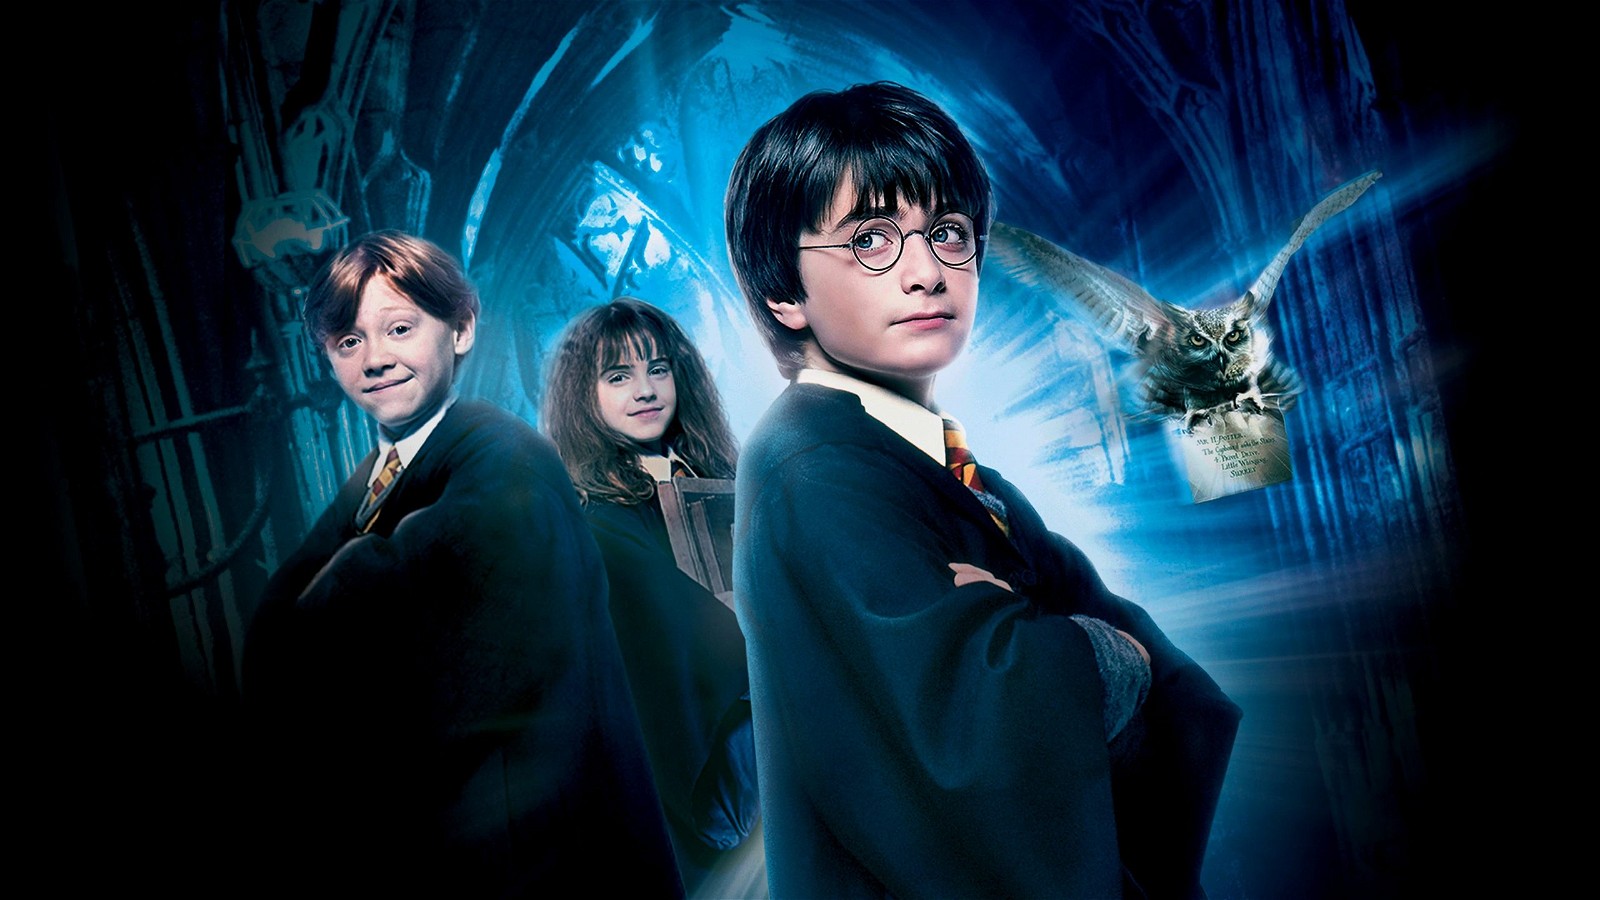 Daniel Radcliffe, Rupert Grint, Emma Watson in Harry Potter and the Philosopher's Stone